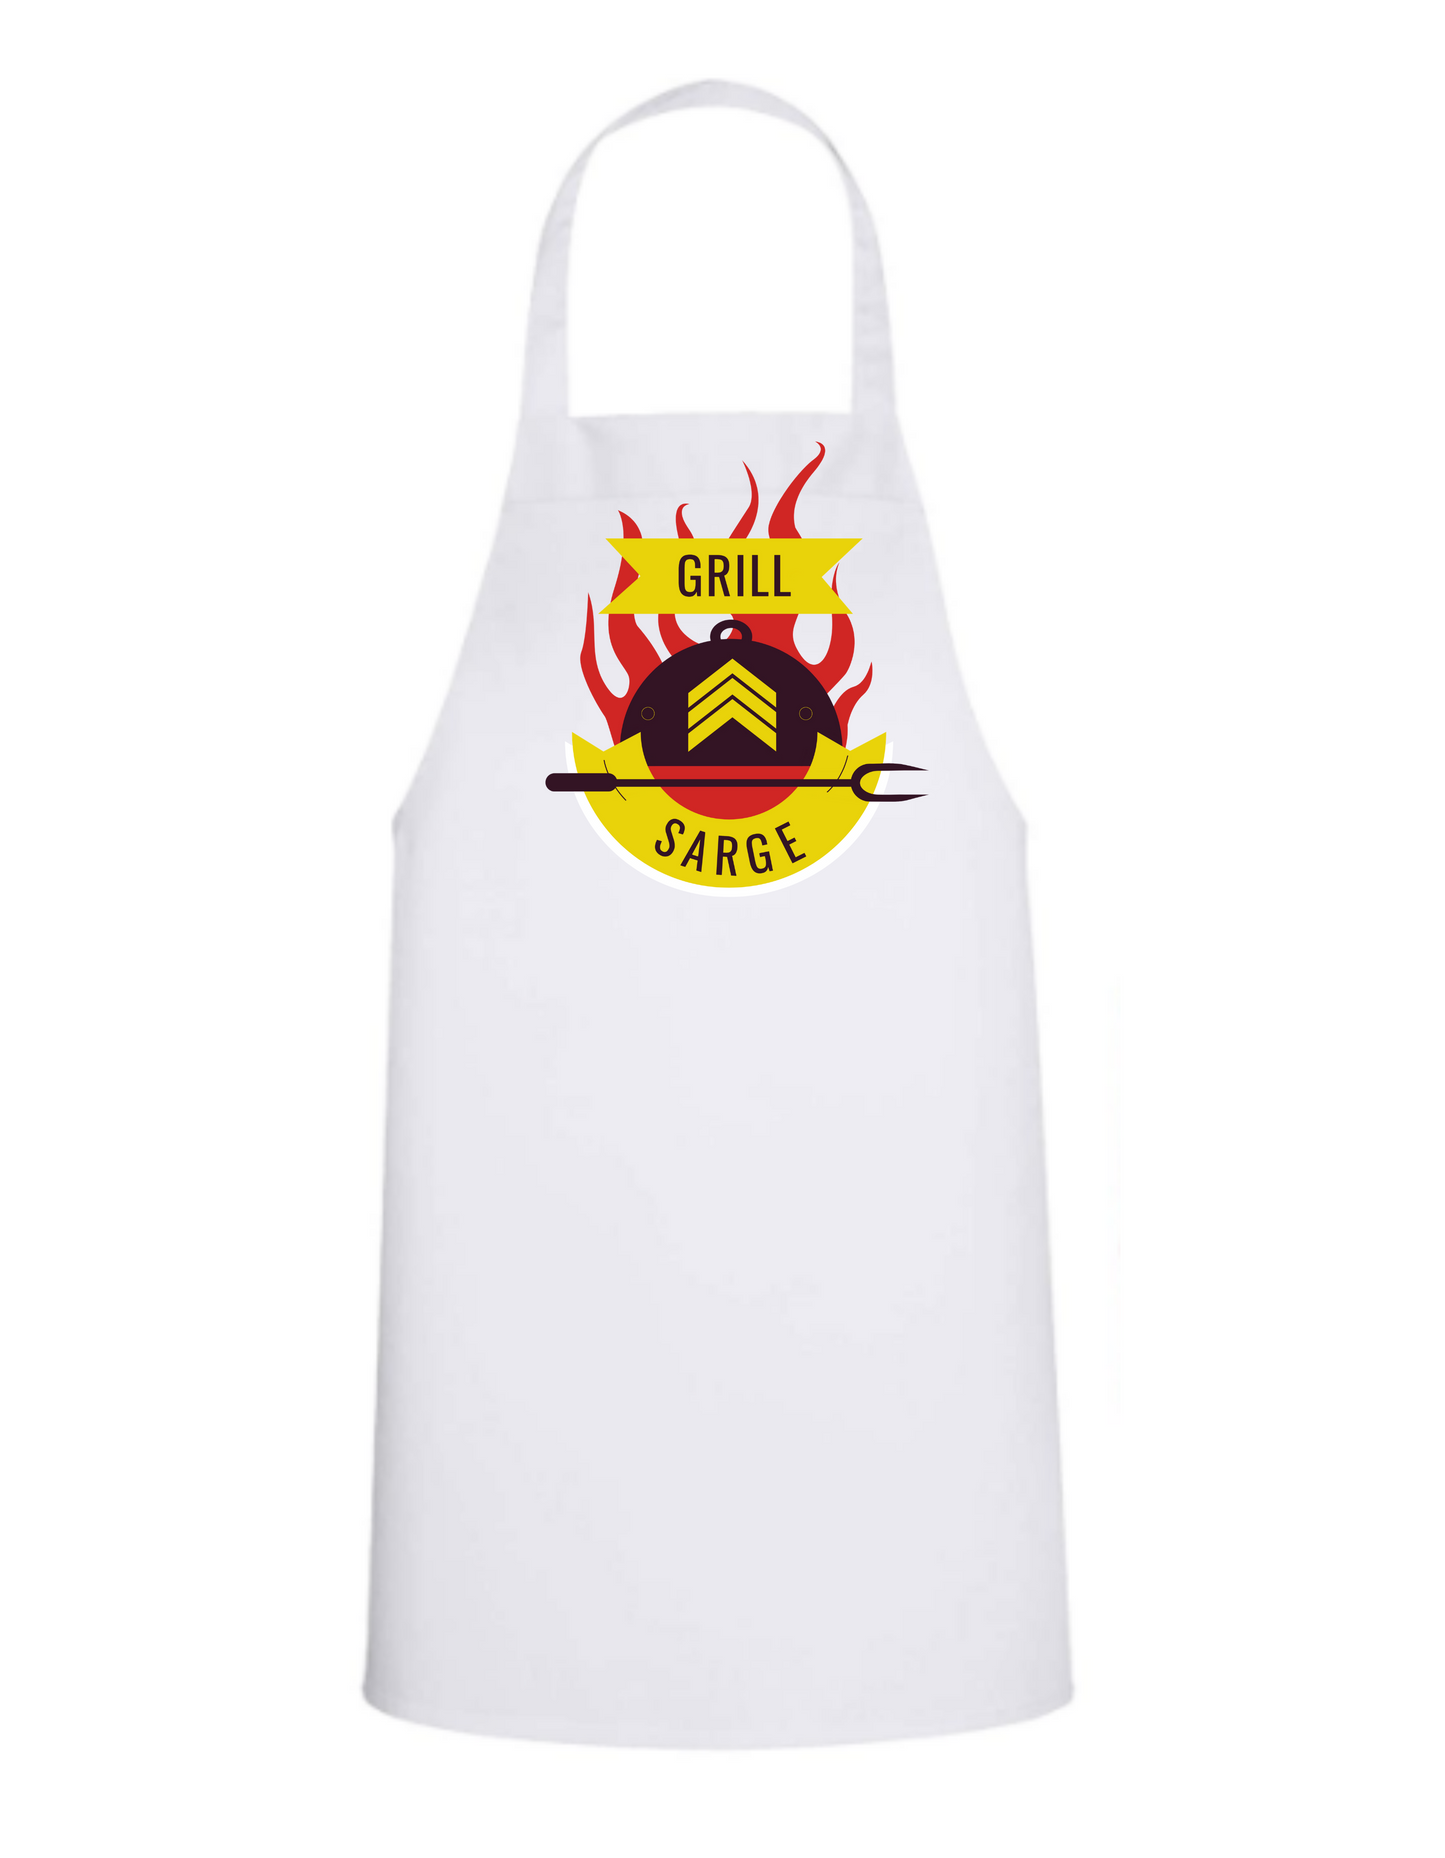 Grill Sarge - Whte Apron with Color design Great Gift - Mister Snarky's